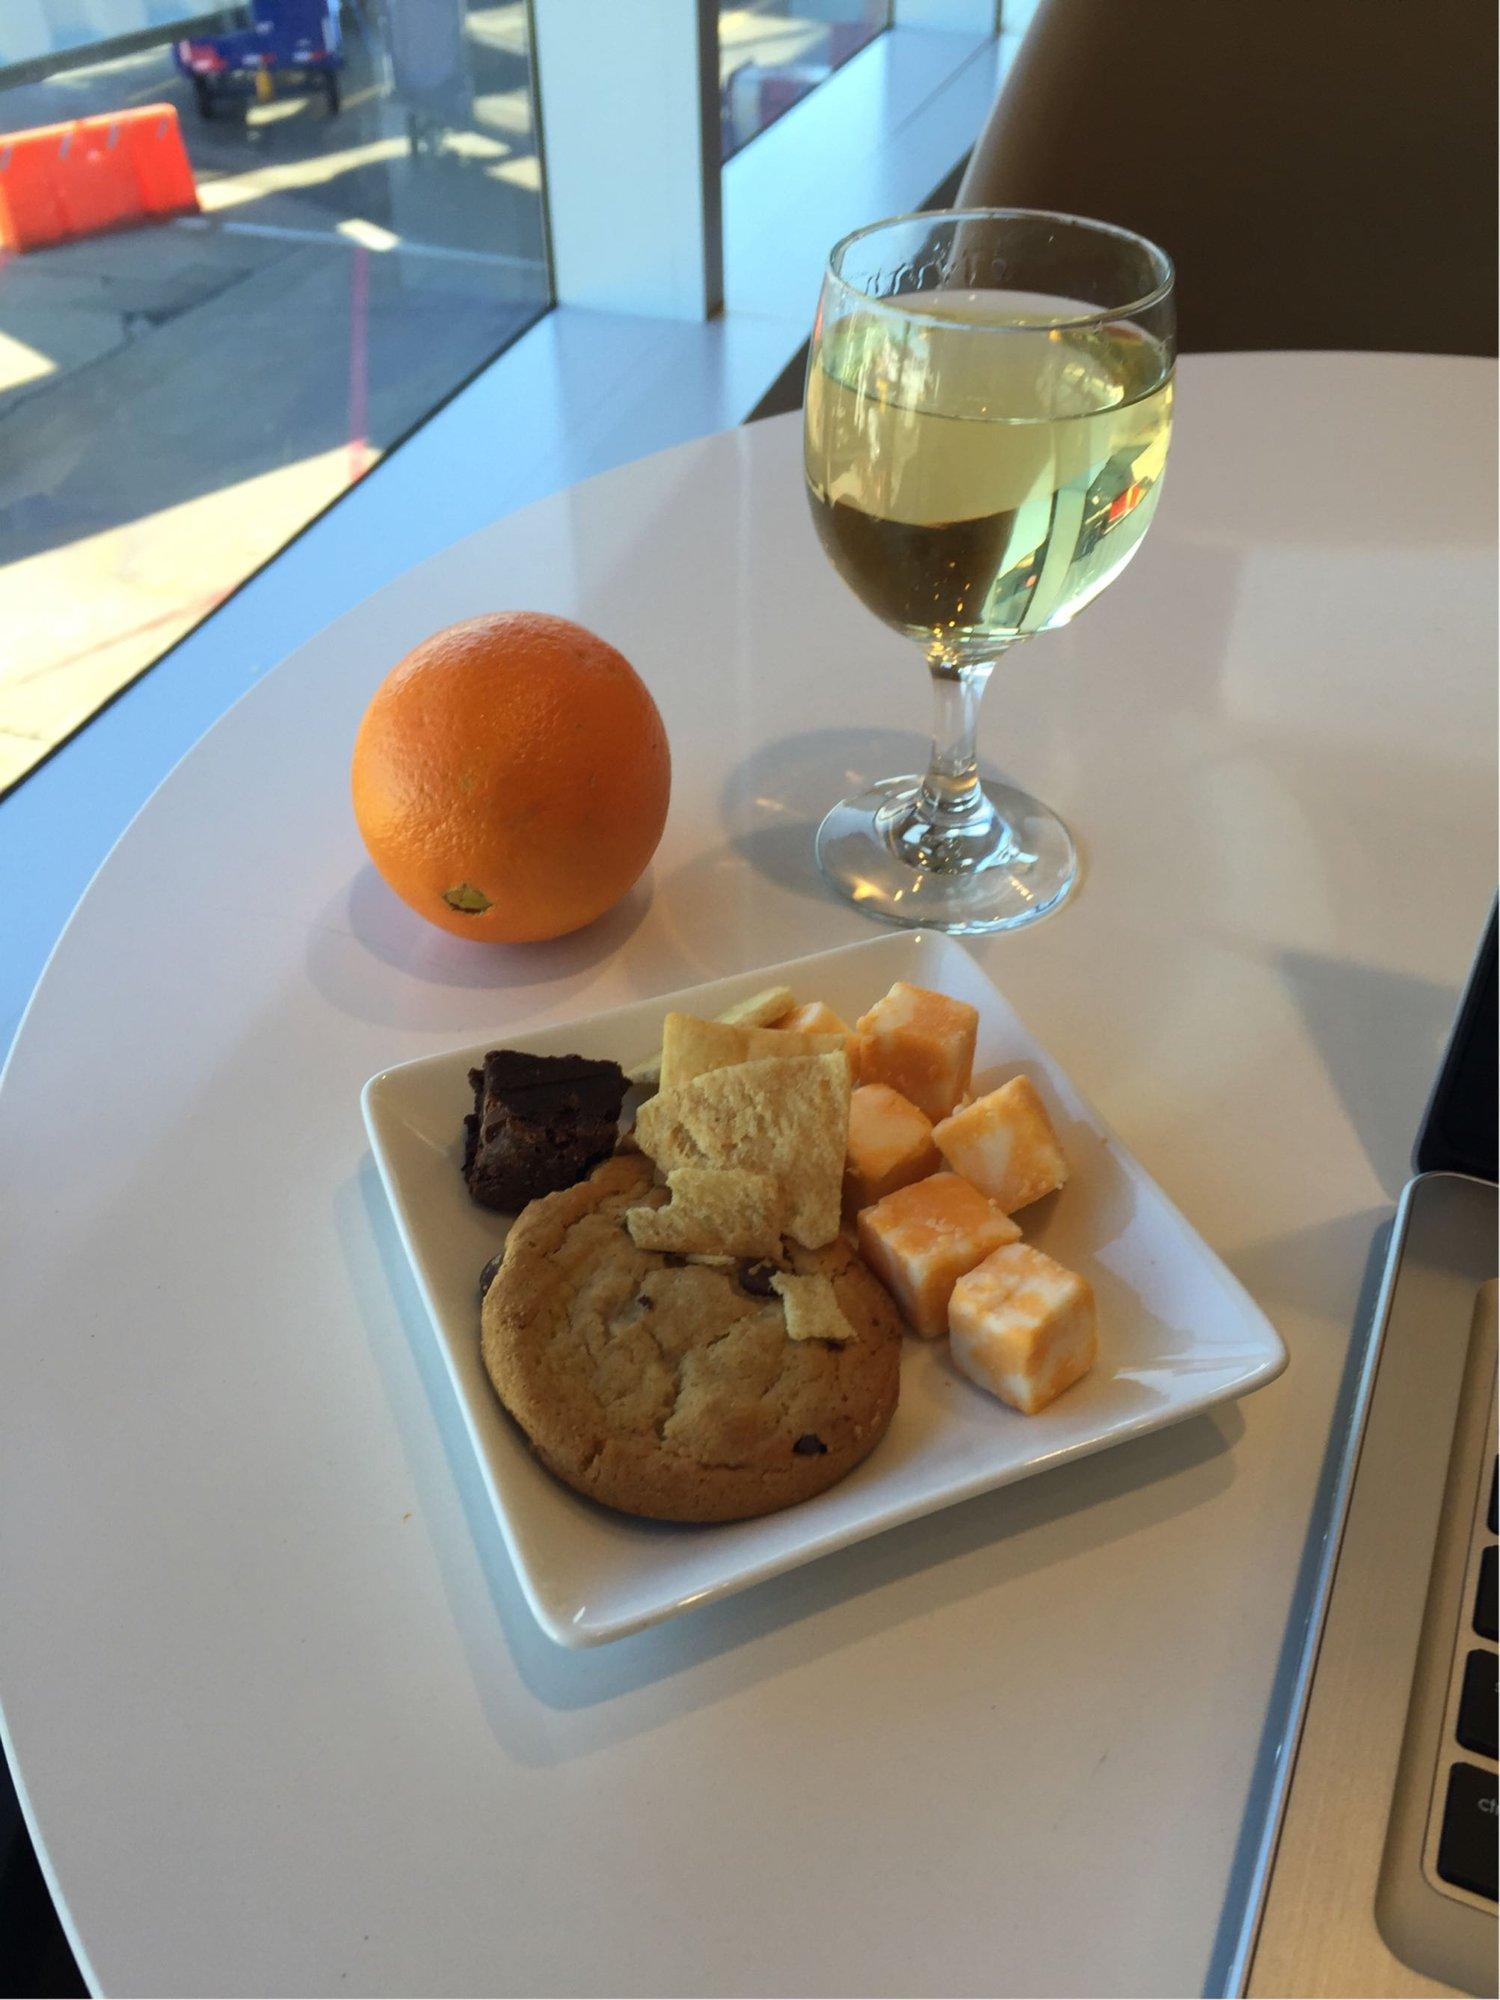 American Airlines Admirals Club image 38 of 50